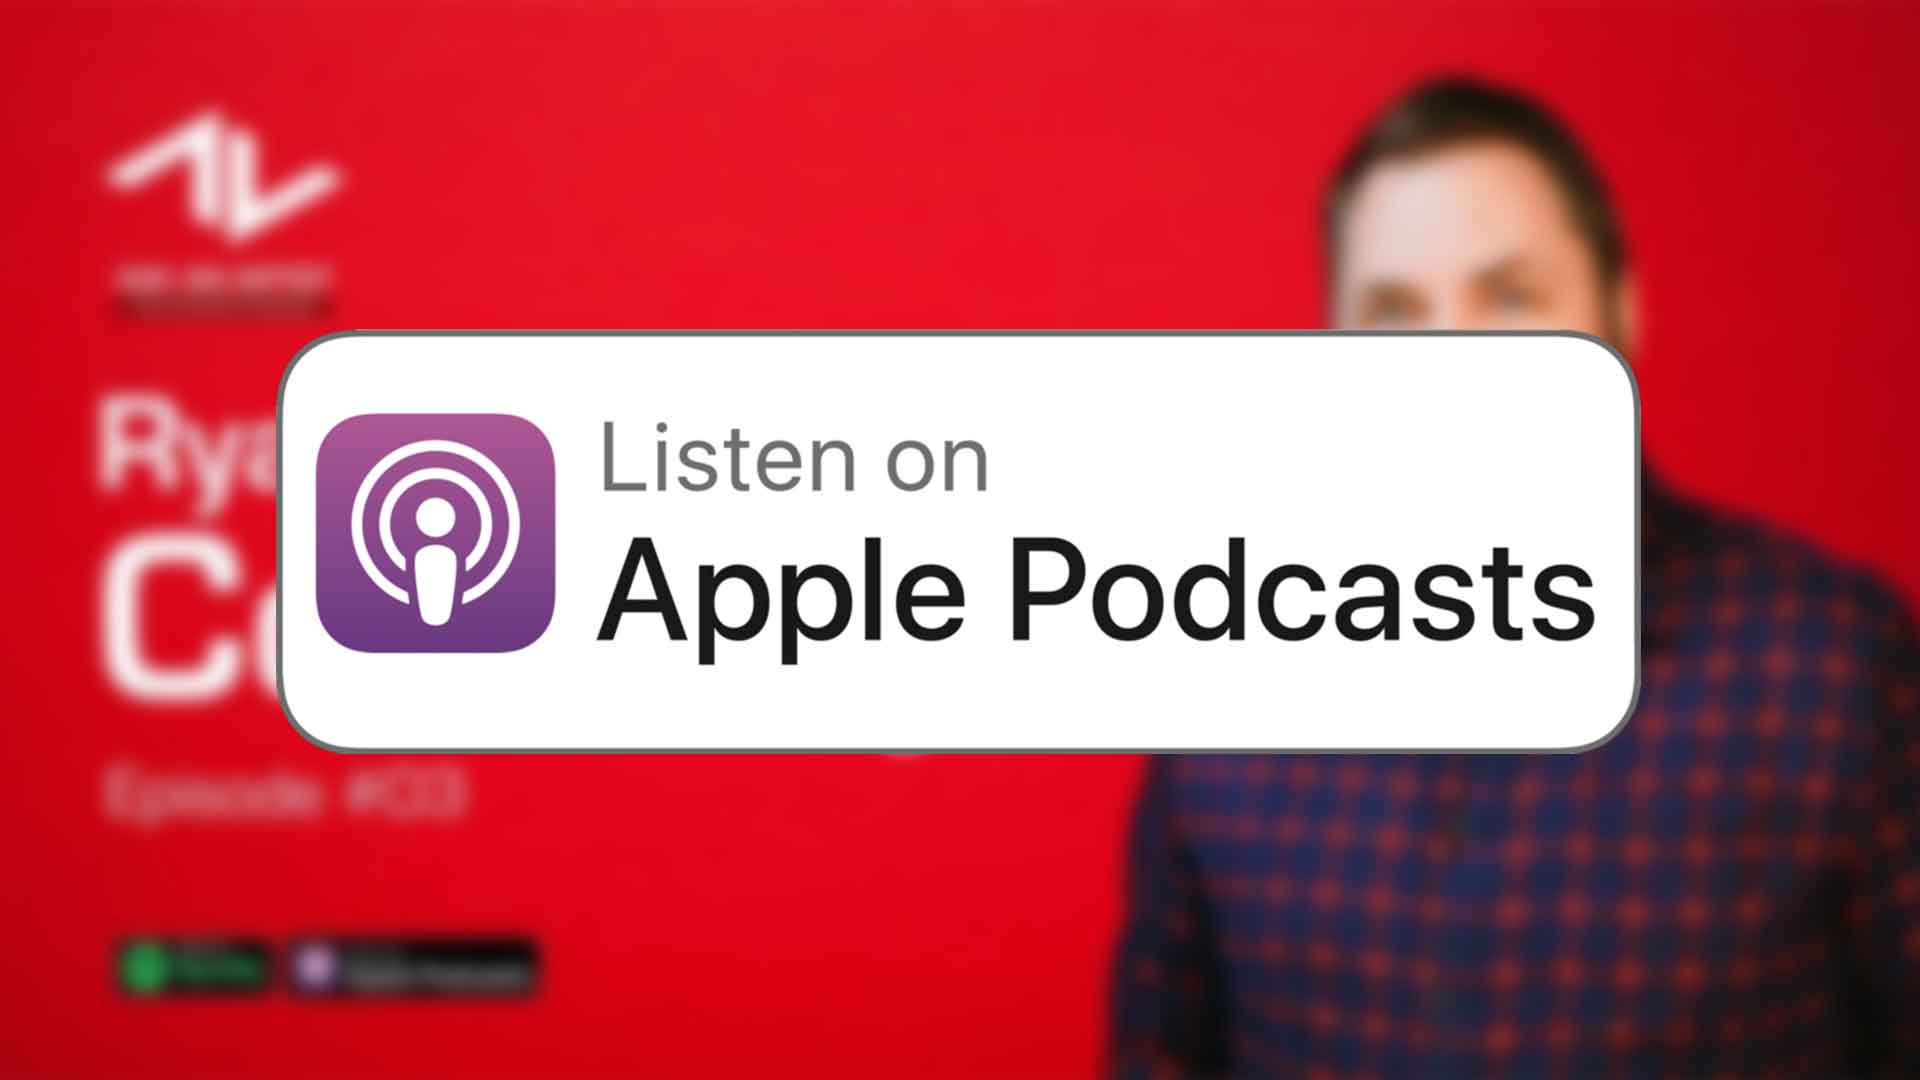 Listen to episode three with Ryan Connolly on Apple Podcasts..